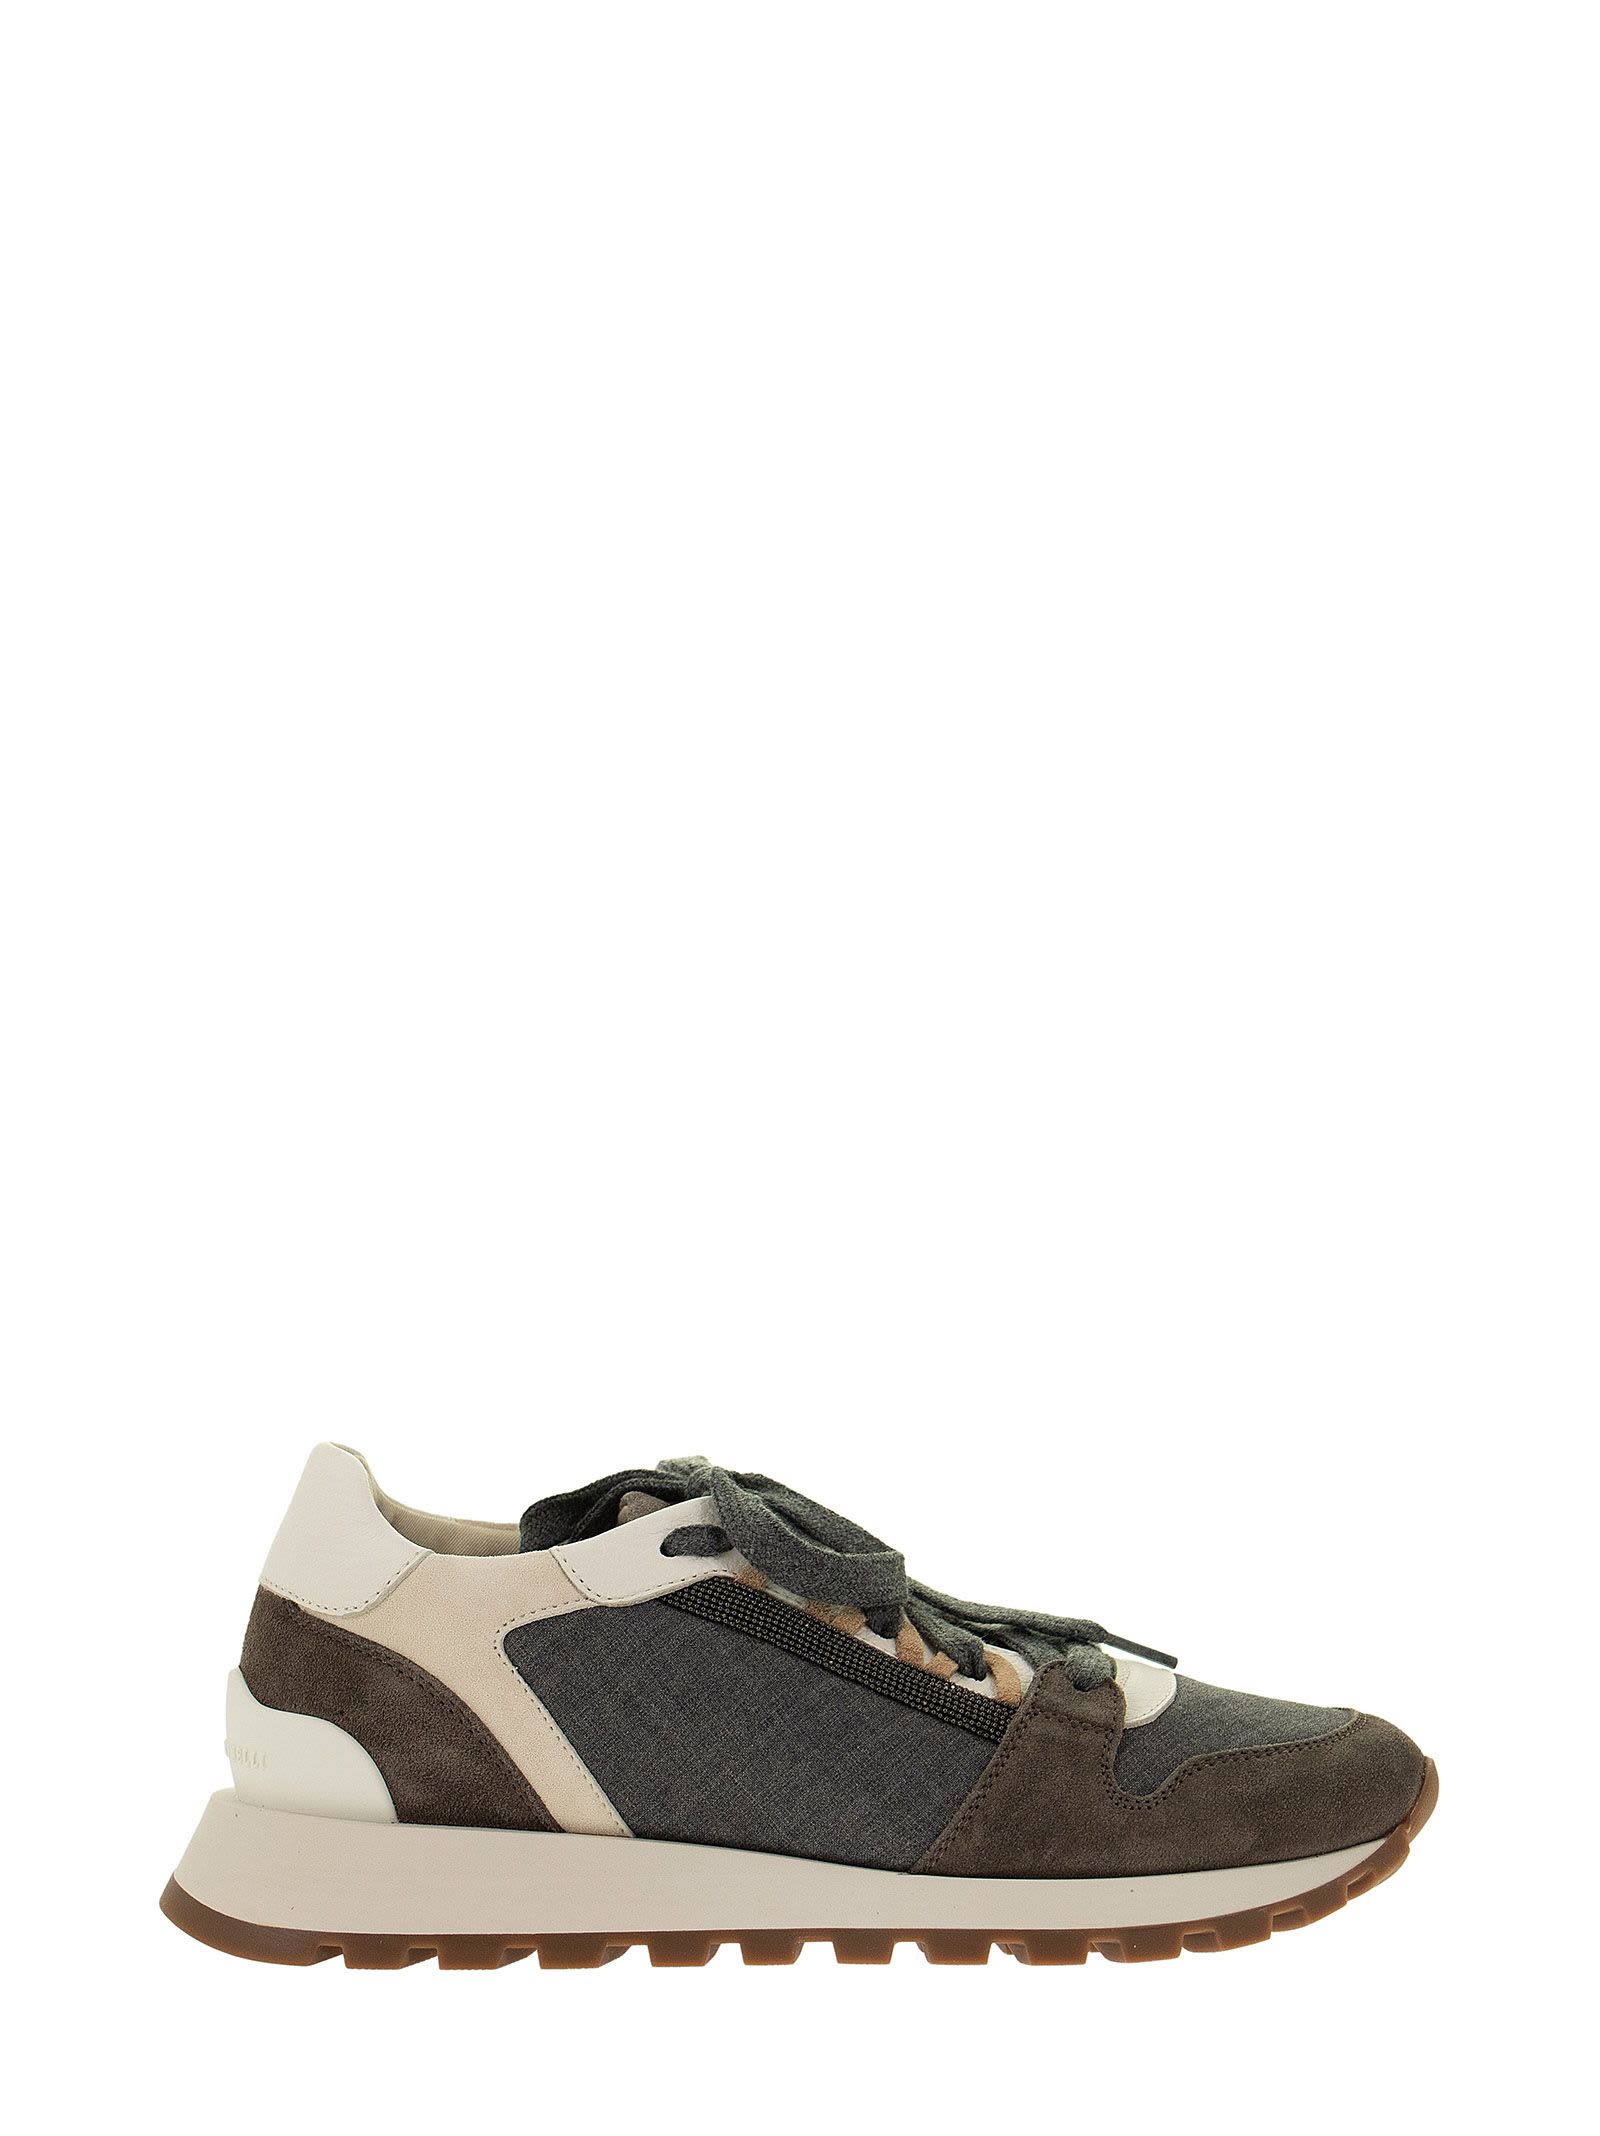 Brunello Cucinelli Runners In Suede, Virgin Wool And Textured Leather With precious Insert